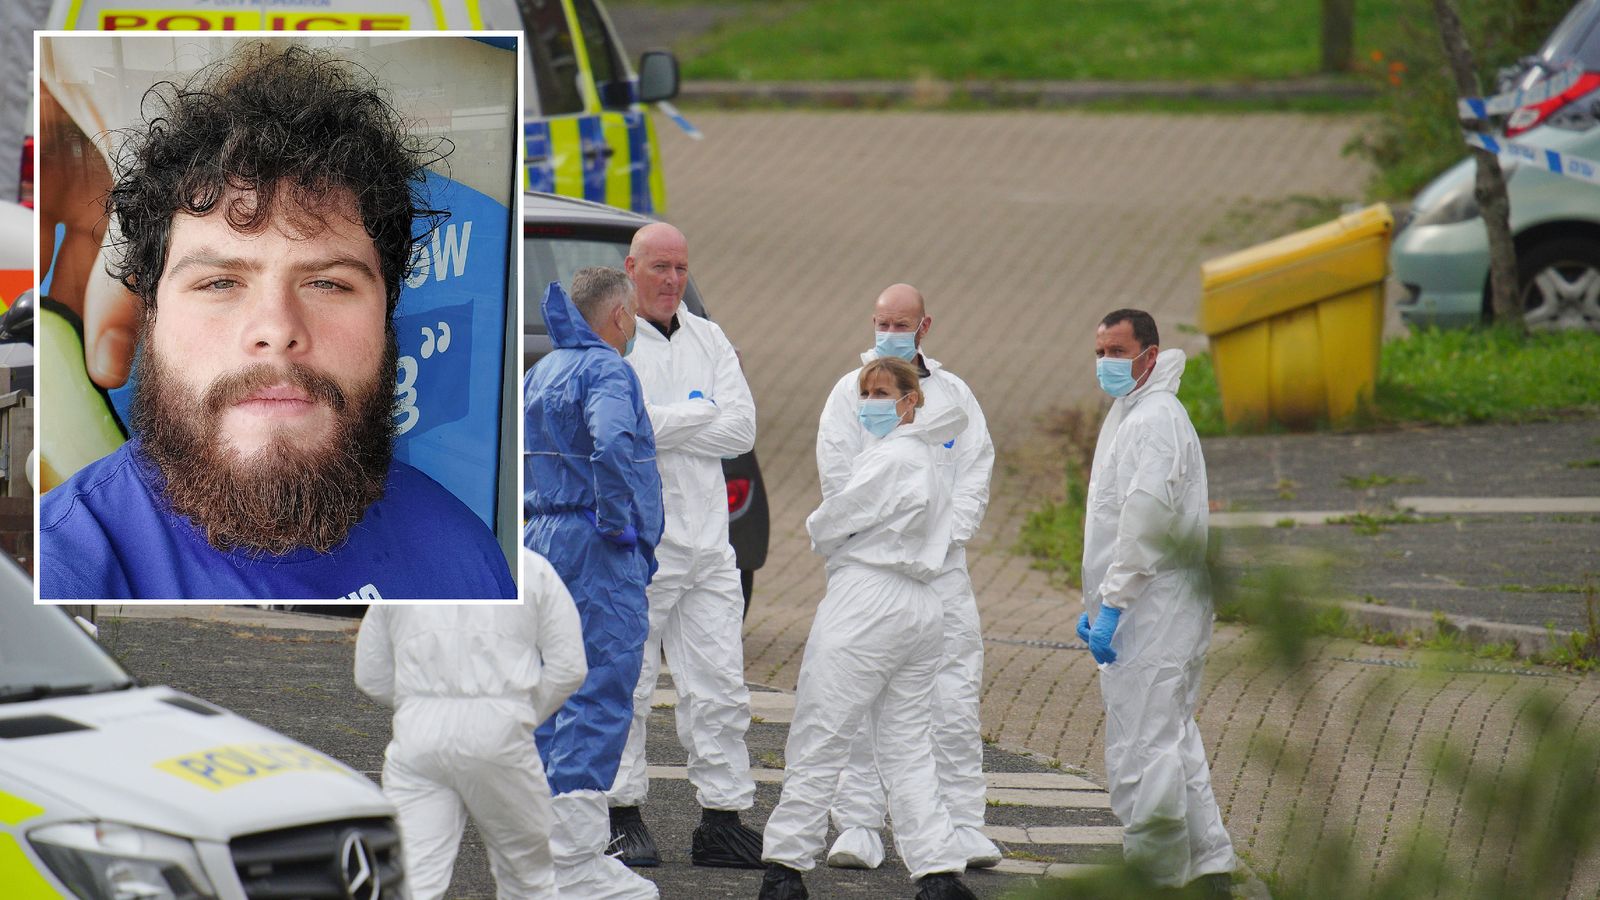 Plymouth Gunman Recorded Video Saying he'd 'lost optimism for Life'